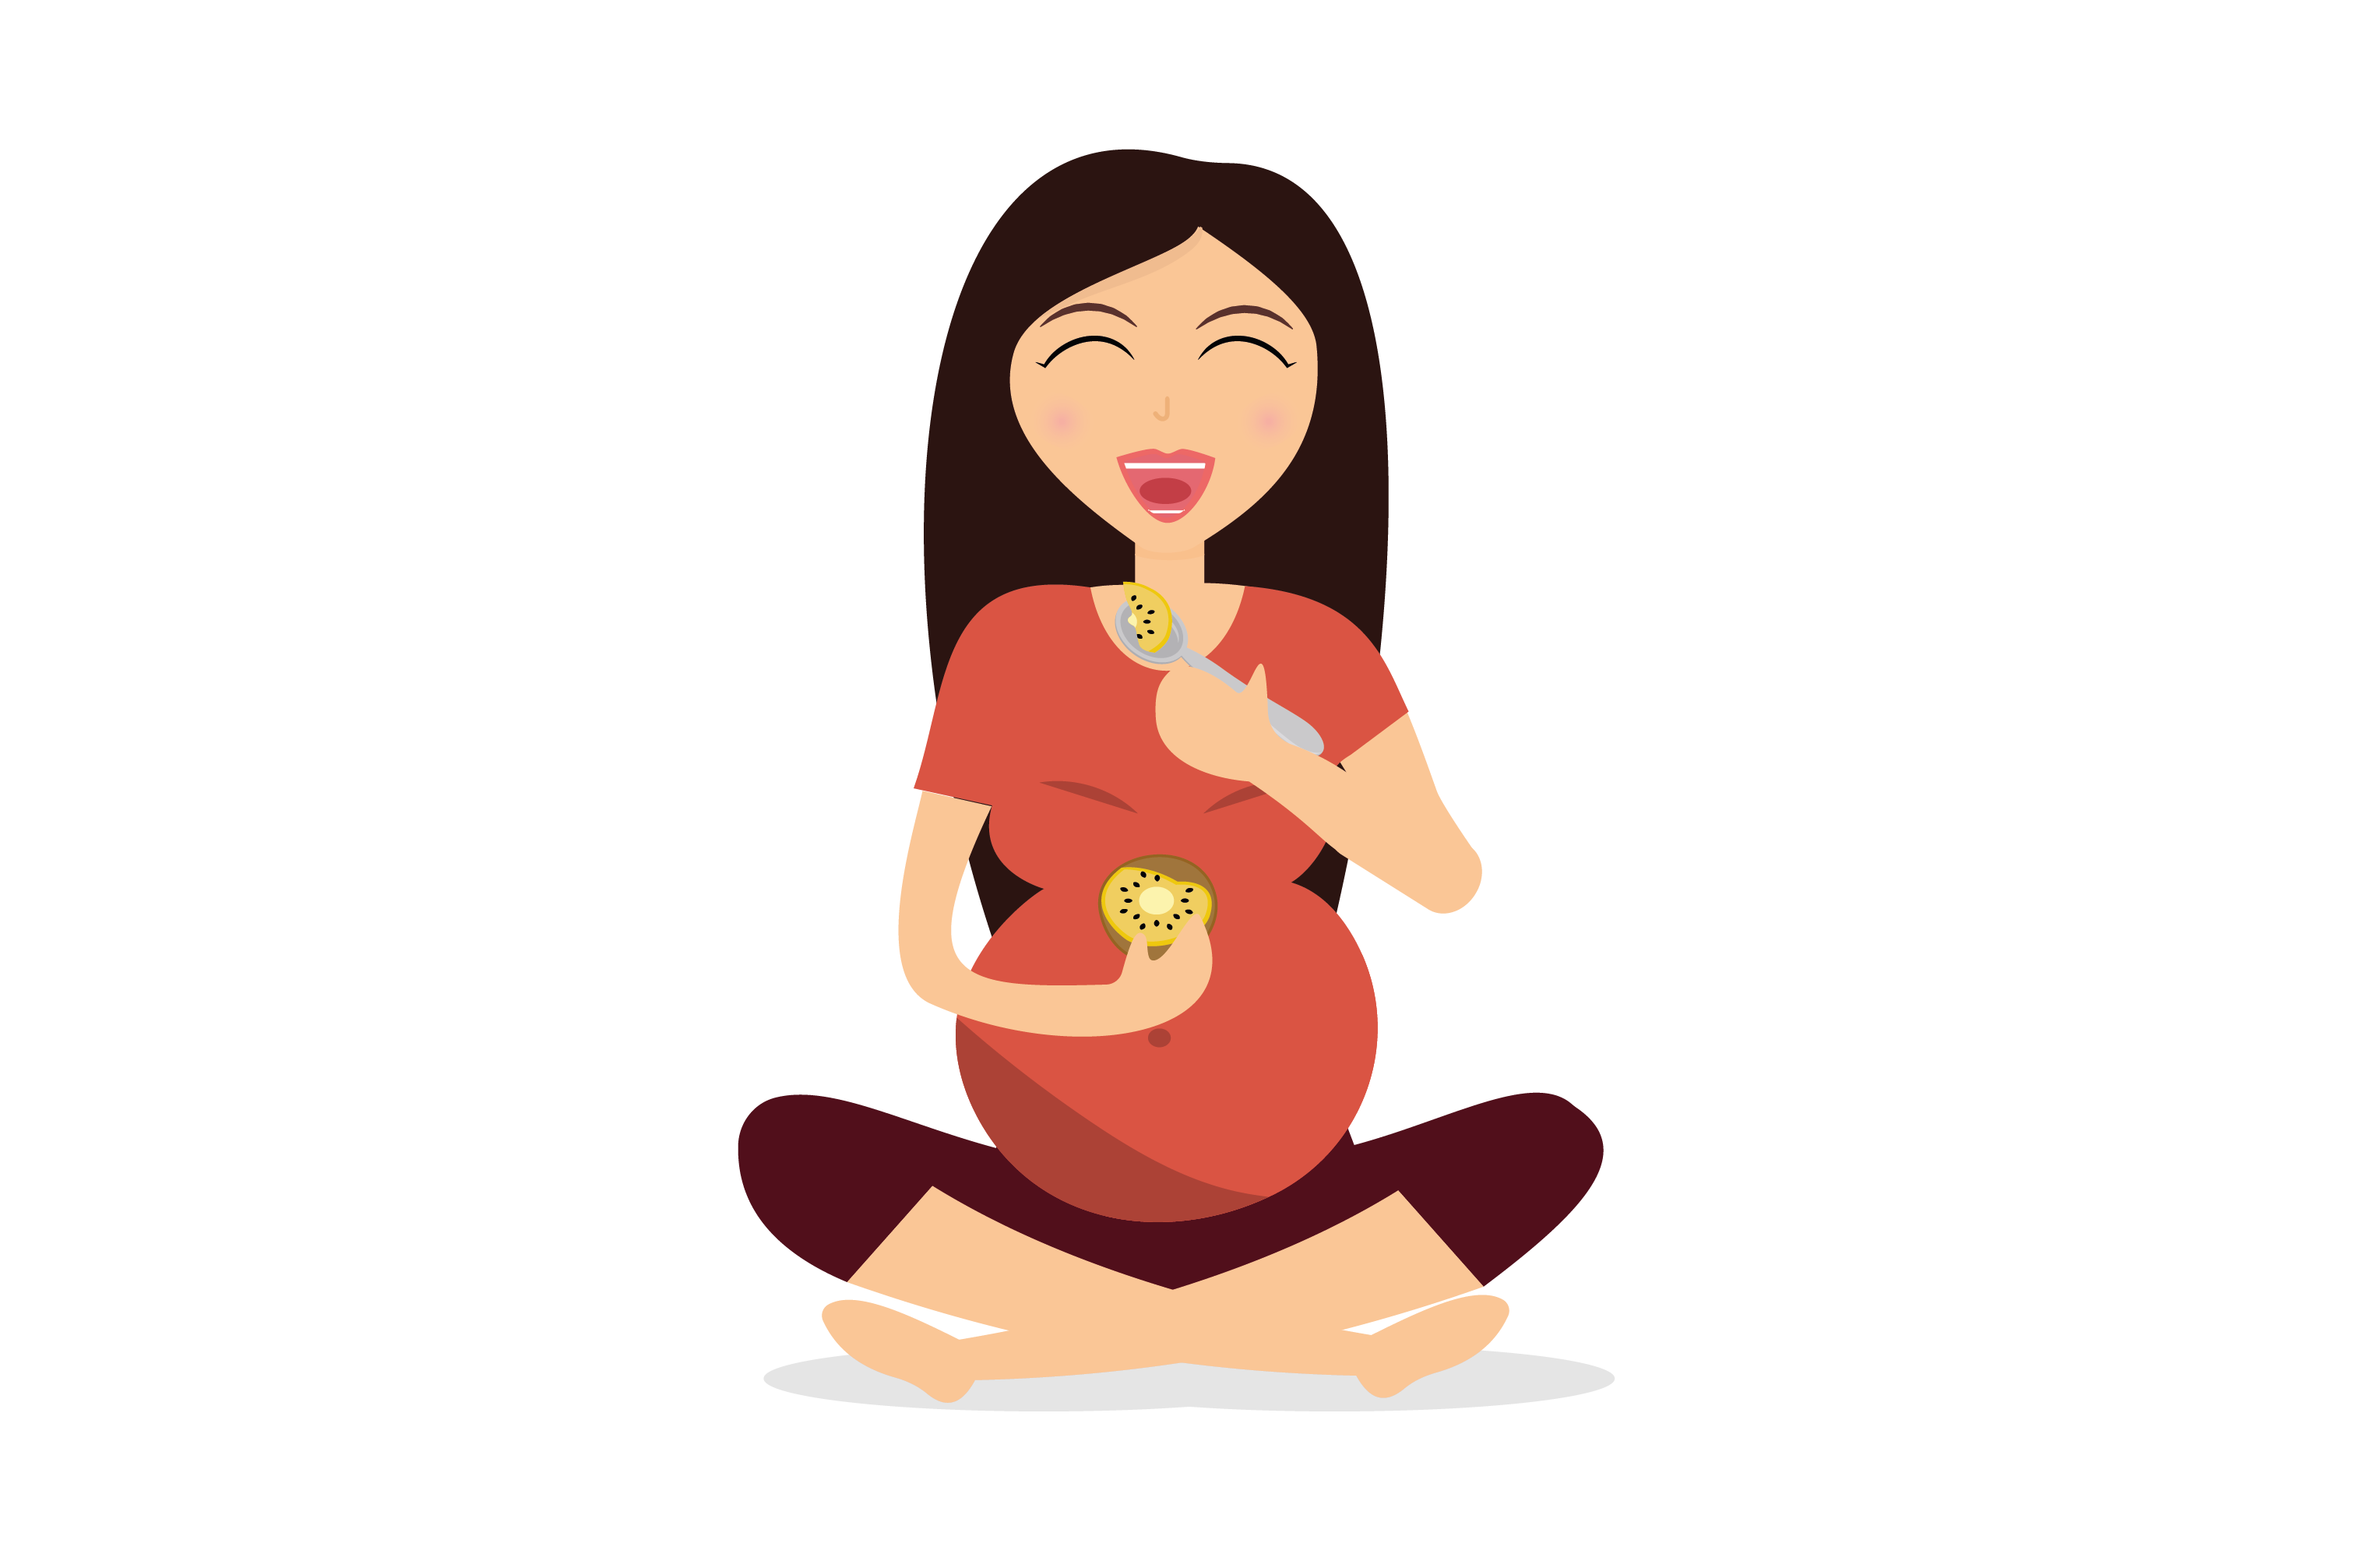 Why kiwifruit is a top pregnancy choice